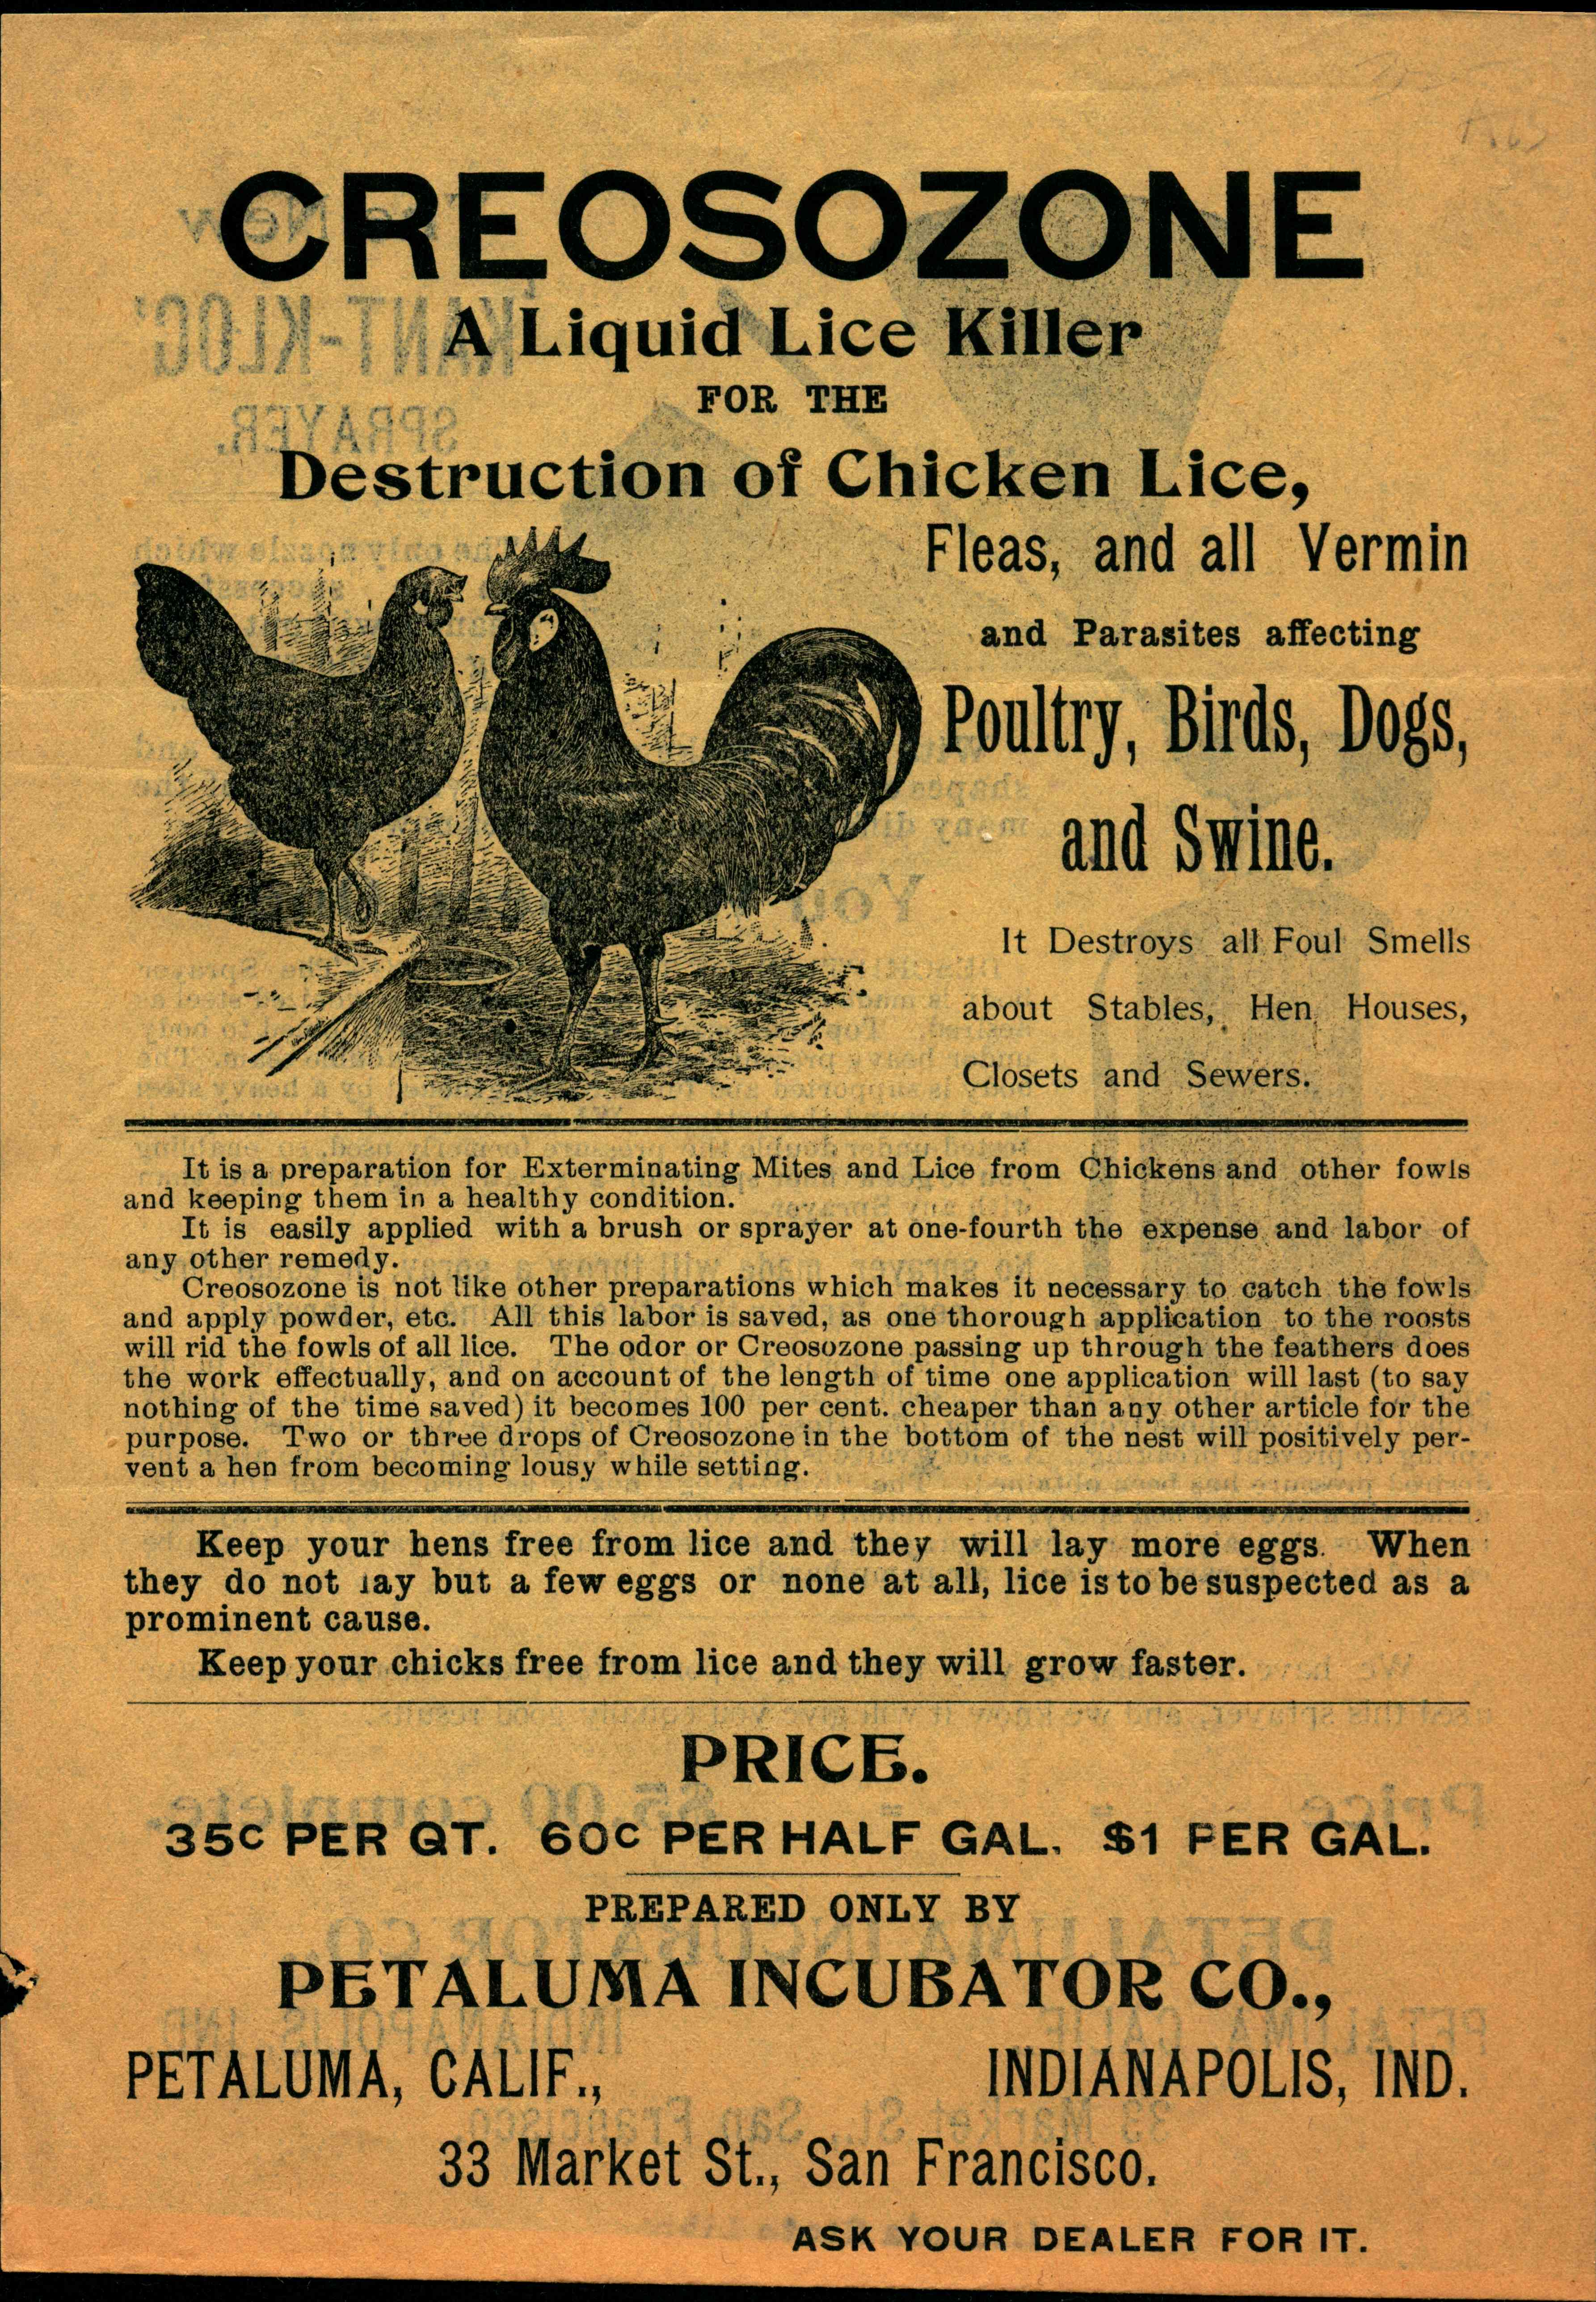 Advertisement from the Petaluma Incubator Company for Creosozone for the destruction of chicken lice, fleas, and all vermin and parasites affecting poultry, birds, dogs, and swine